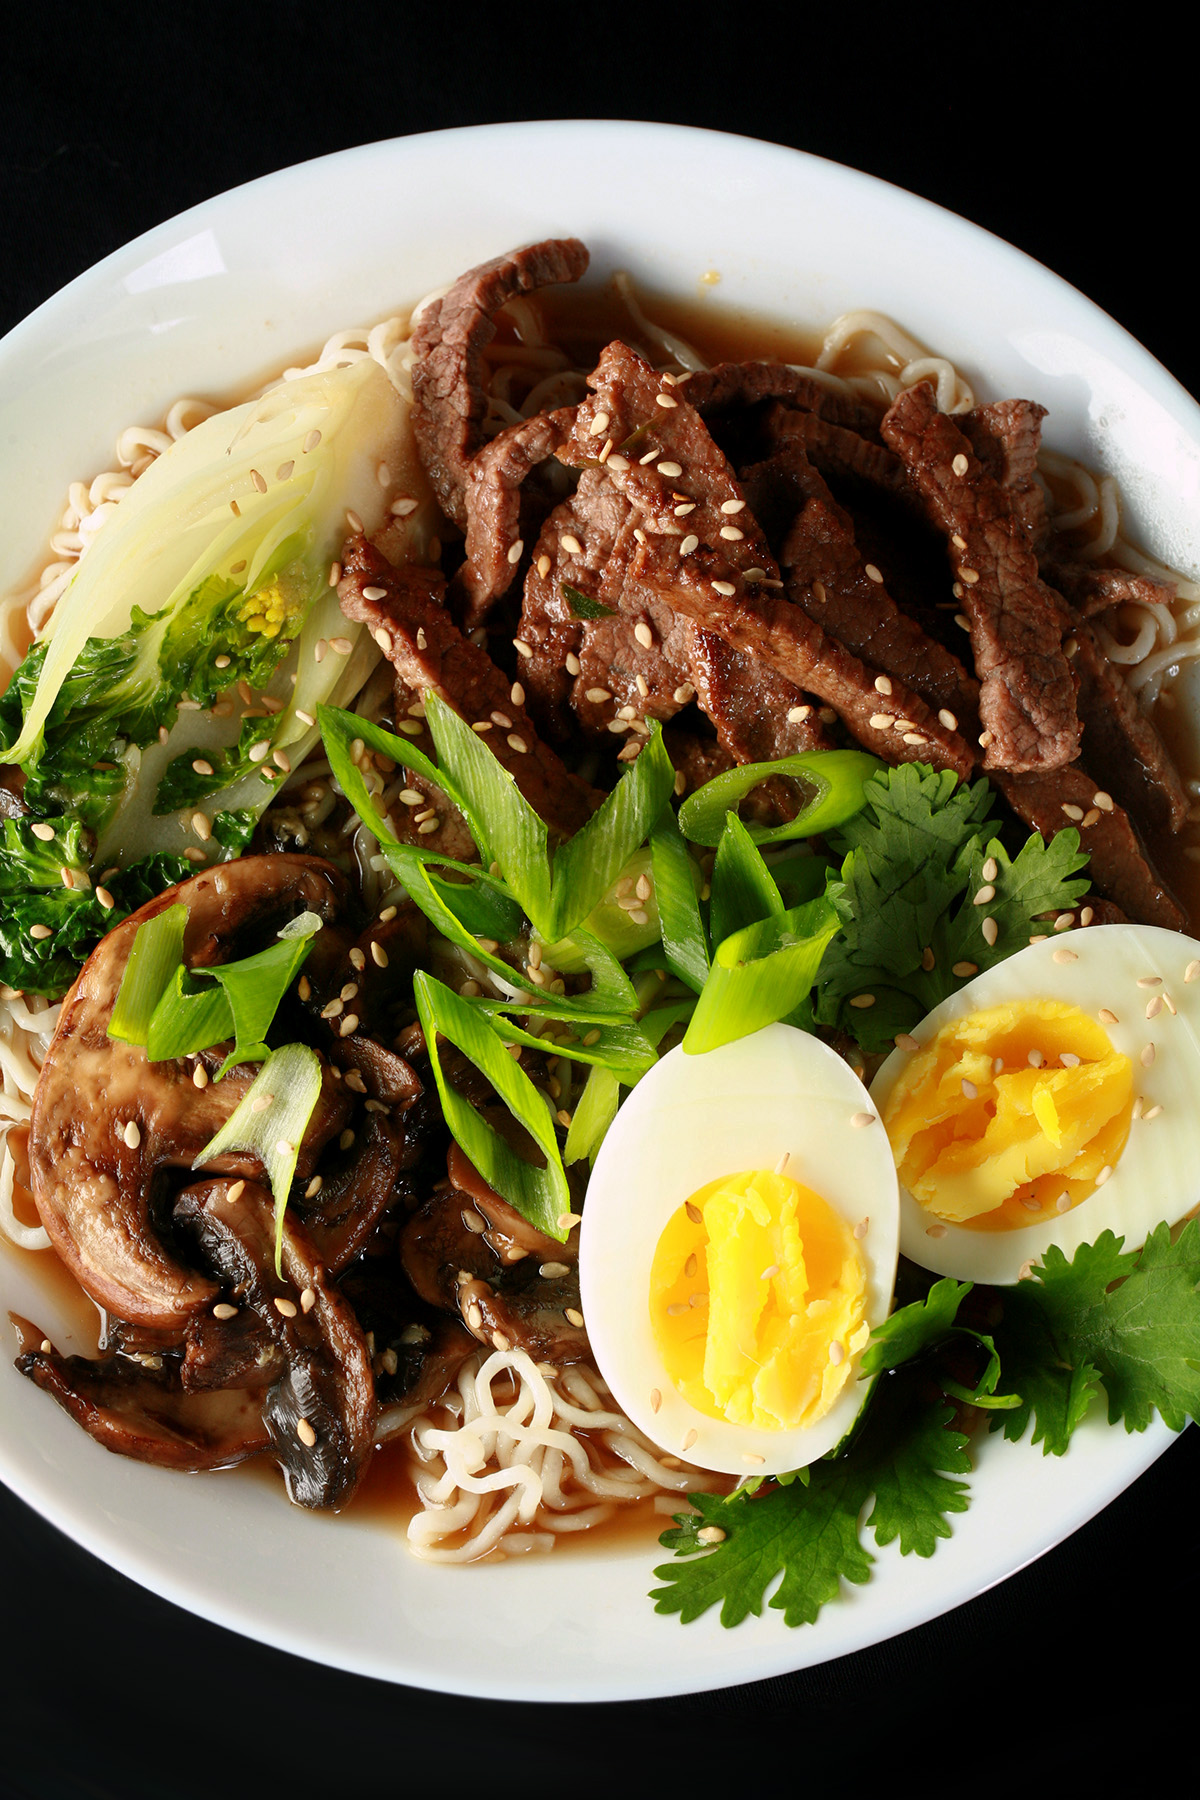 A bowl of low-carb ramen noodles, with baby bok choy, eggs, and more.